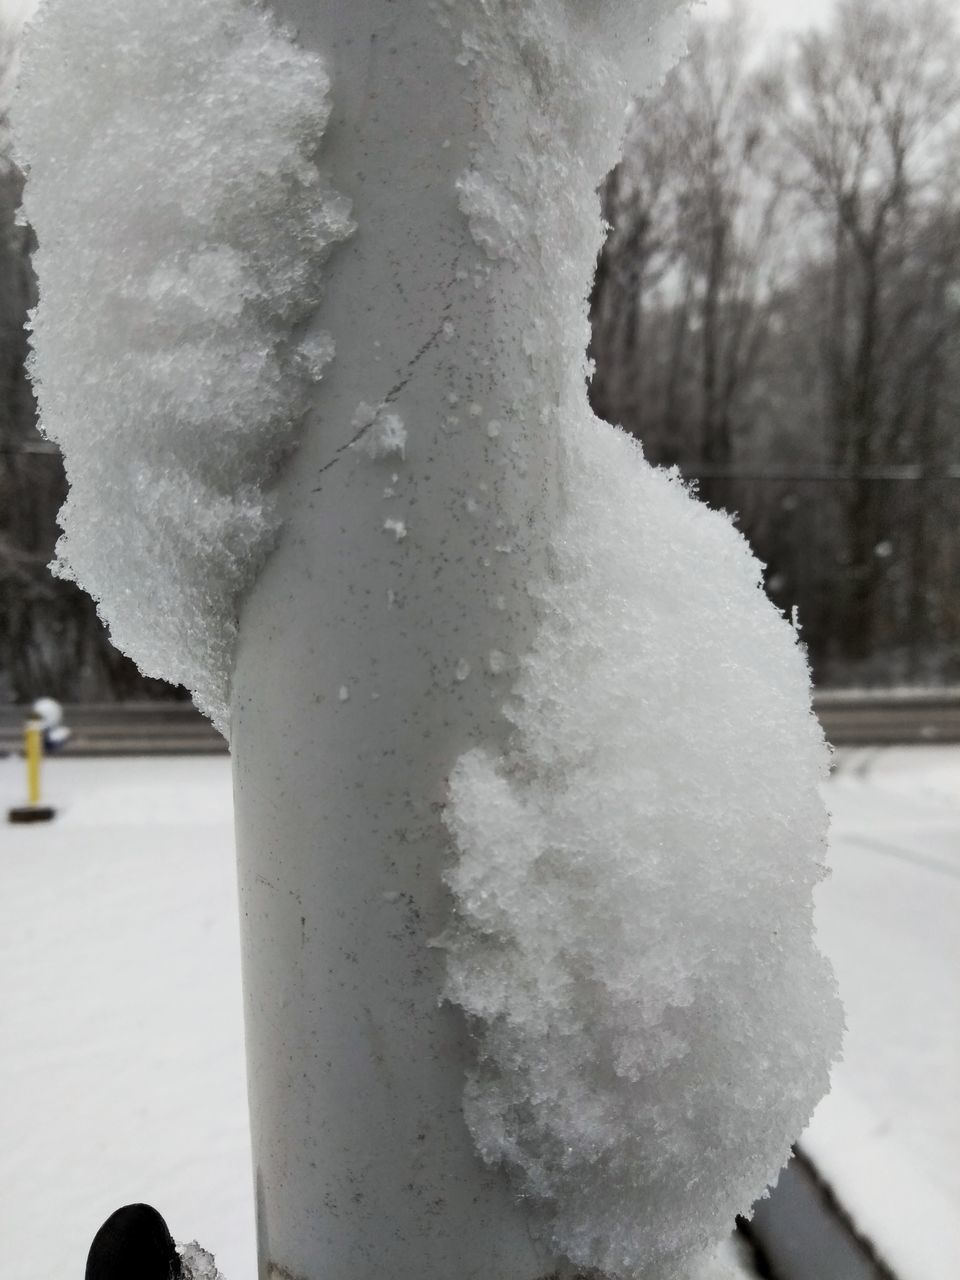 CLOSE-UP OF FROZEN TREE TRUNK DURING WINTER